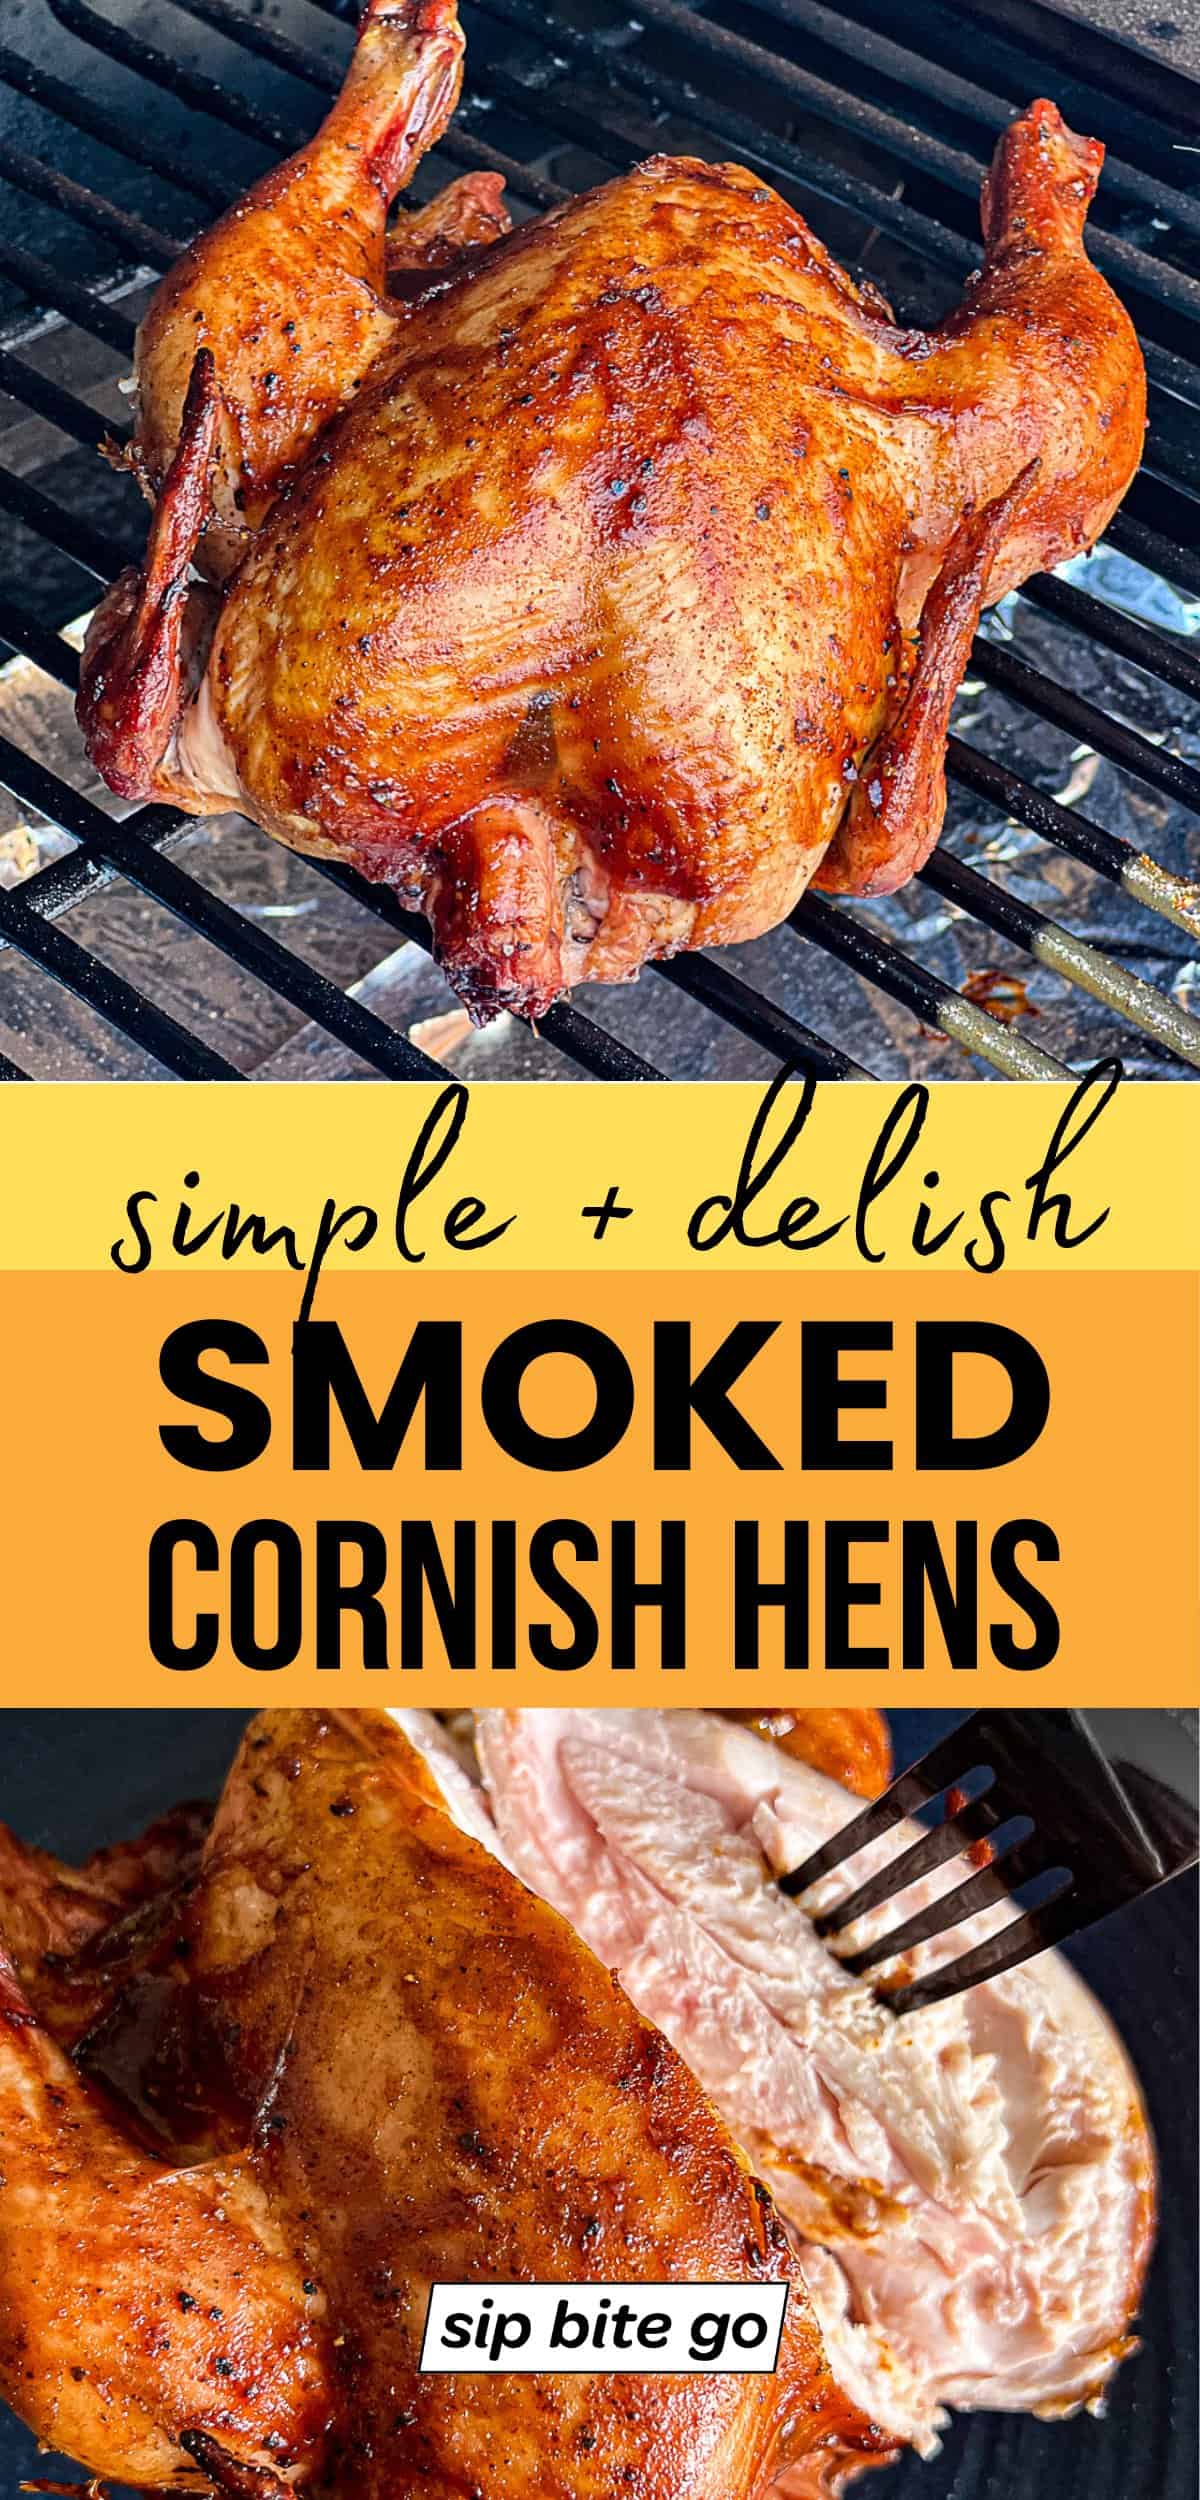 Traeger Grills Smoked Cornish Hens Recipe Images with text overlay and Sip Bite Go logo